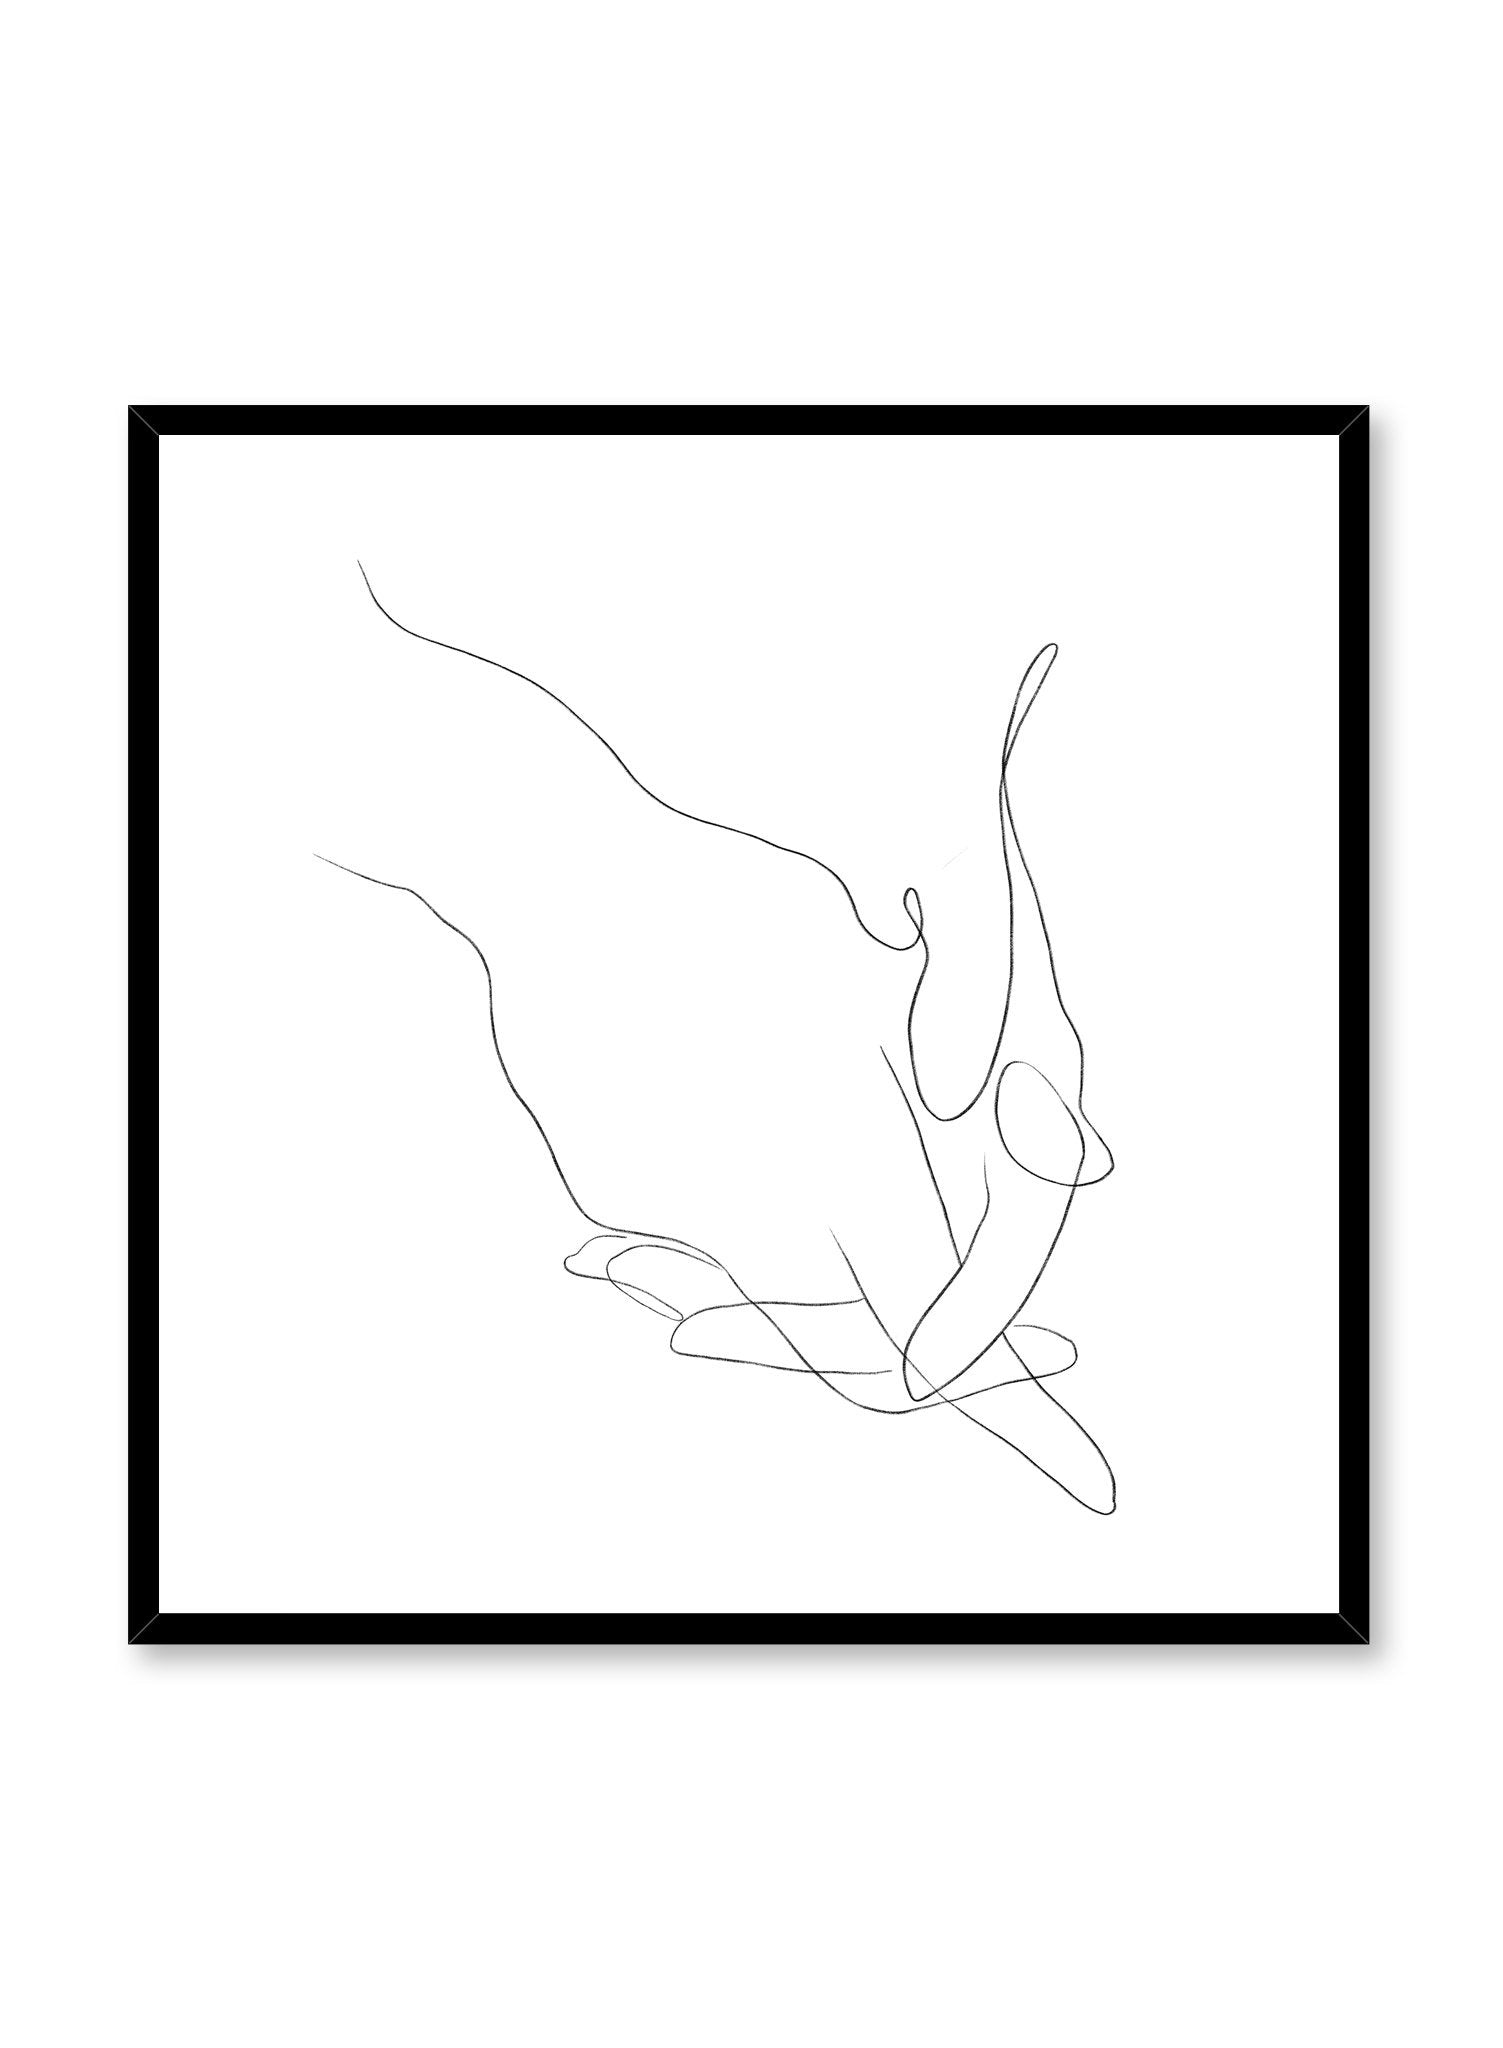 Modern minimalist poster by Opposite Wall with abstract illustration of holding hands line art